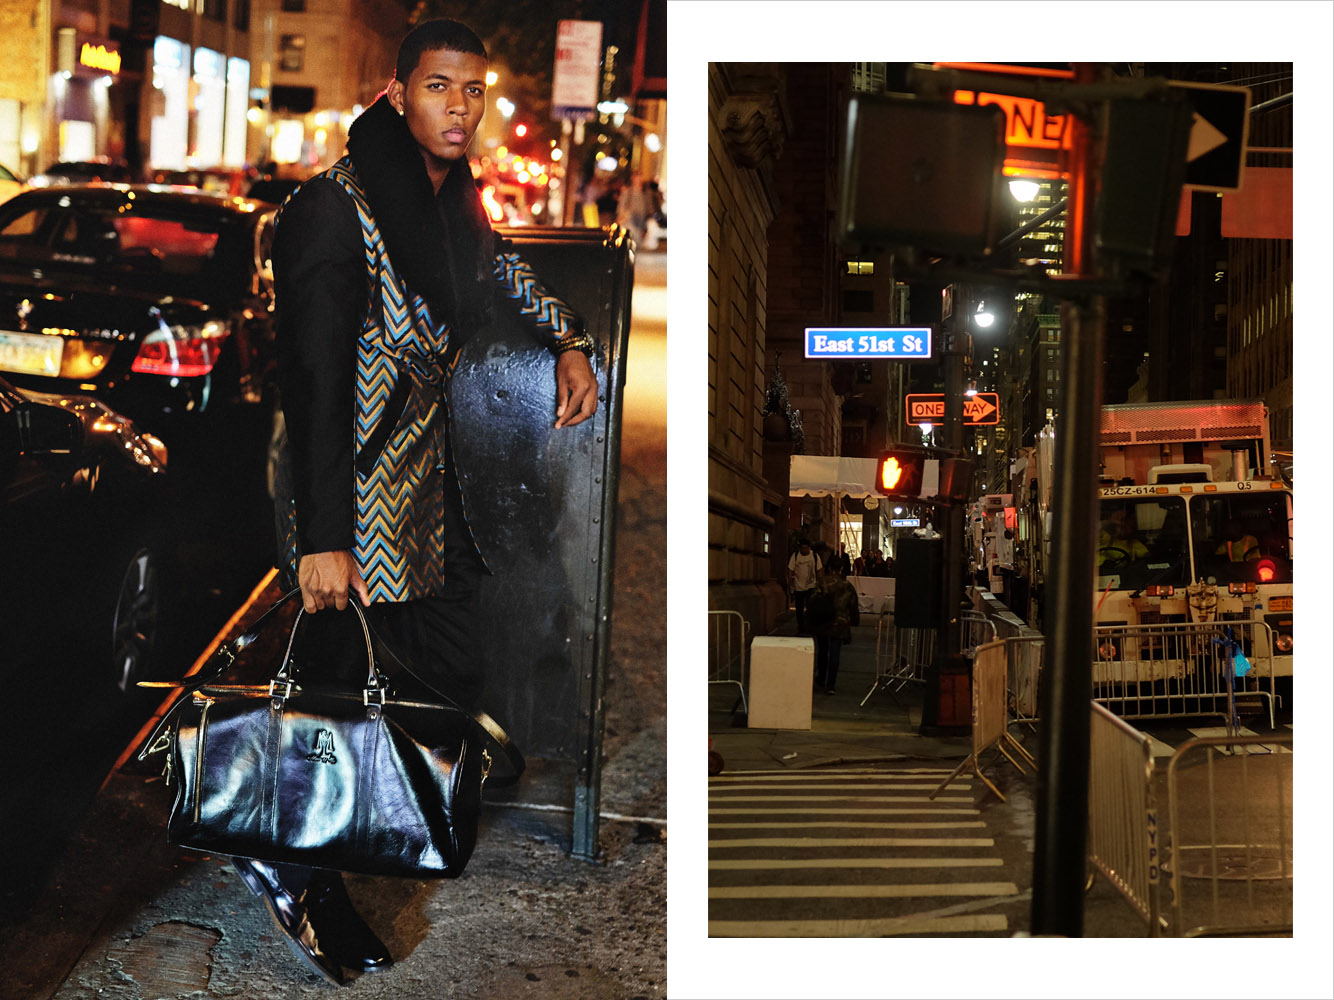 Night shot, man's chevron coat with contrasting NY streetscape photograph, East 51st Street, for marketing and social media. Menswear photographed in New York City by Kent Johnson.